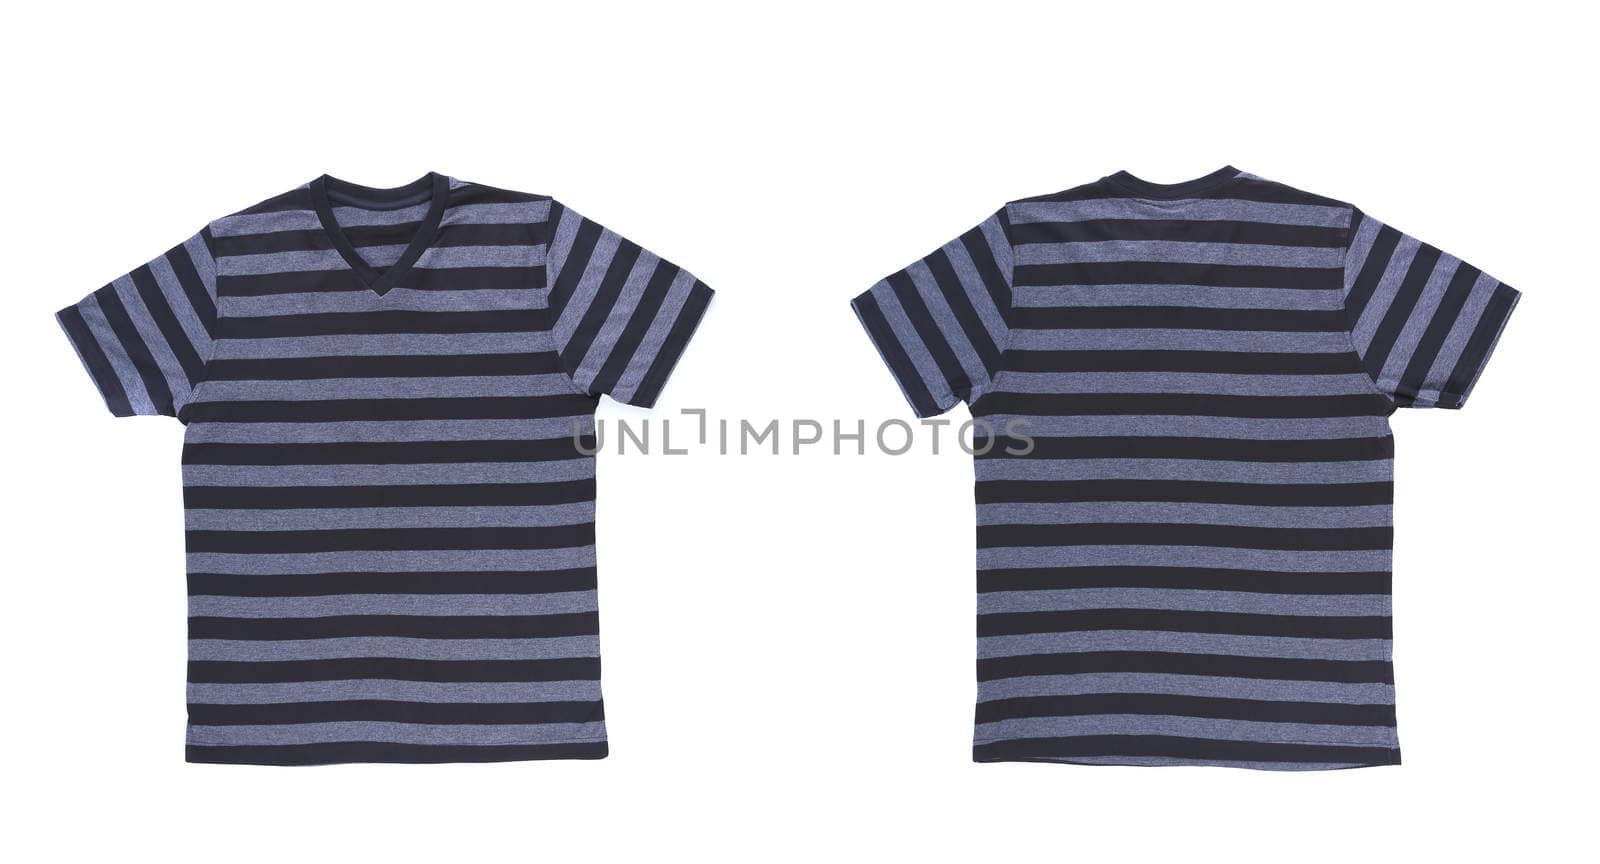 Men's striped T-shirt with clipping path. Front and back.